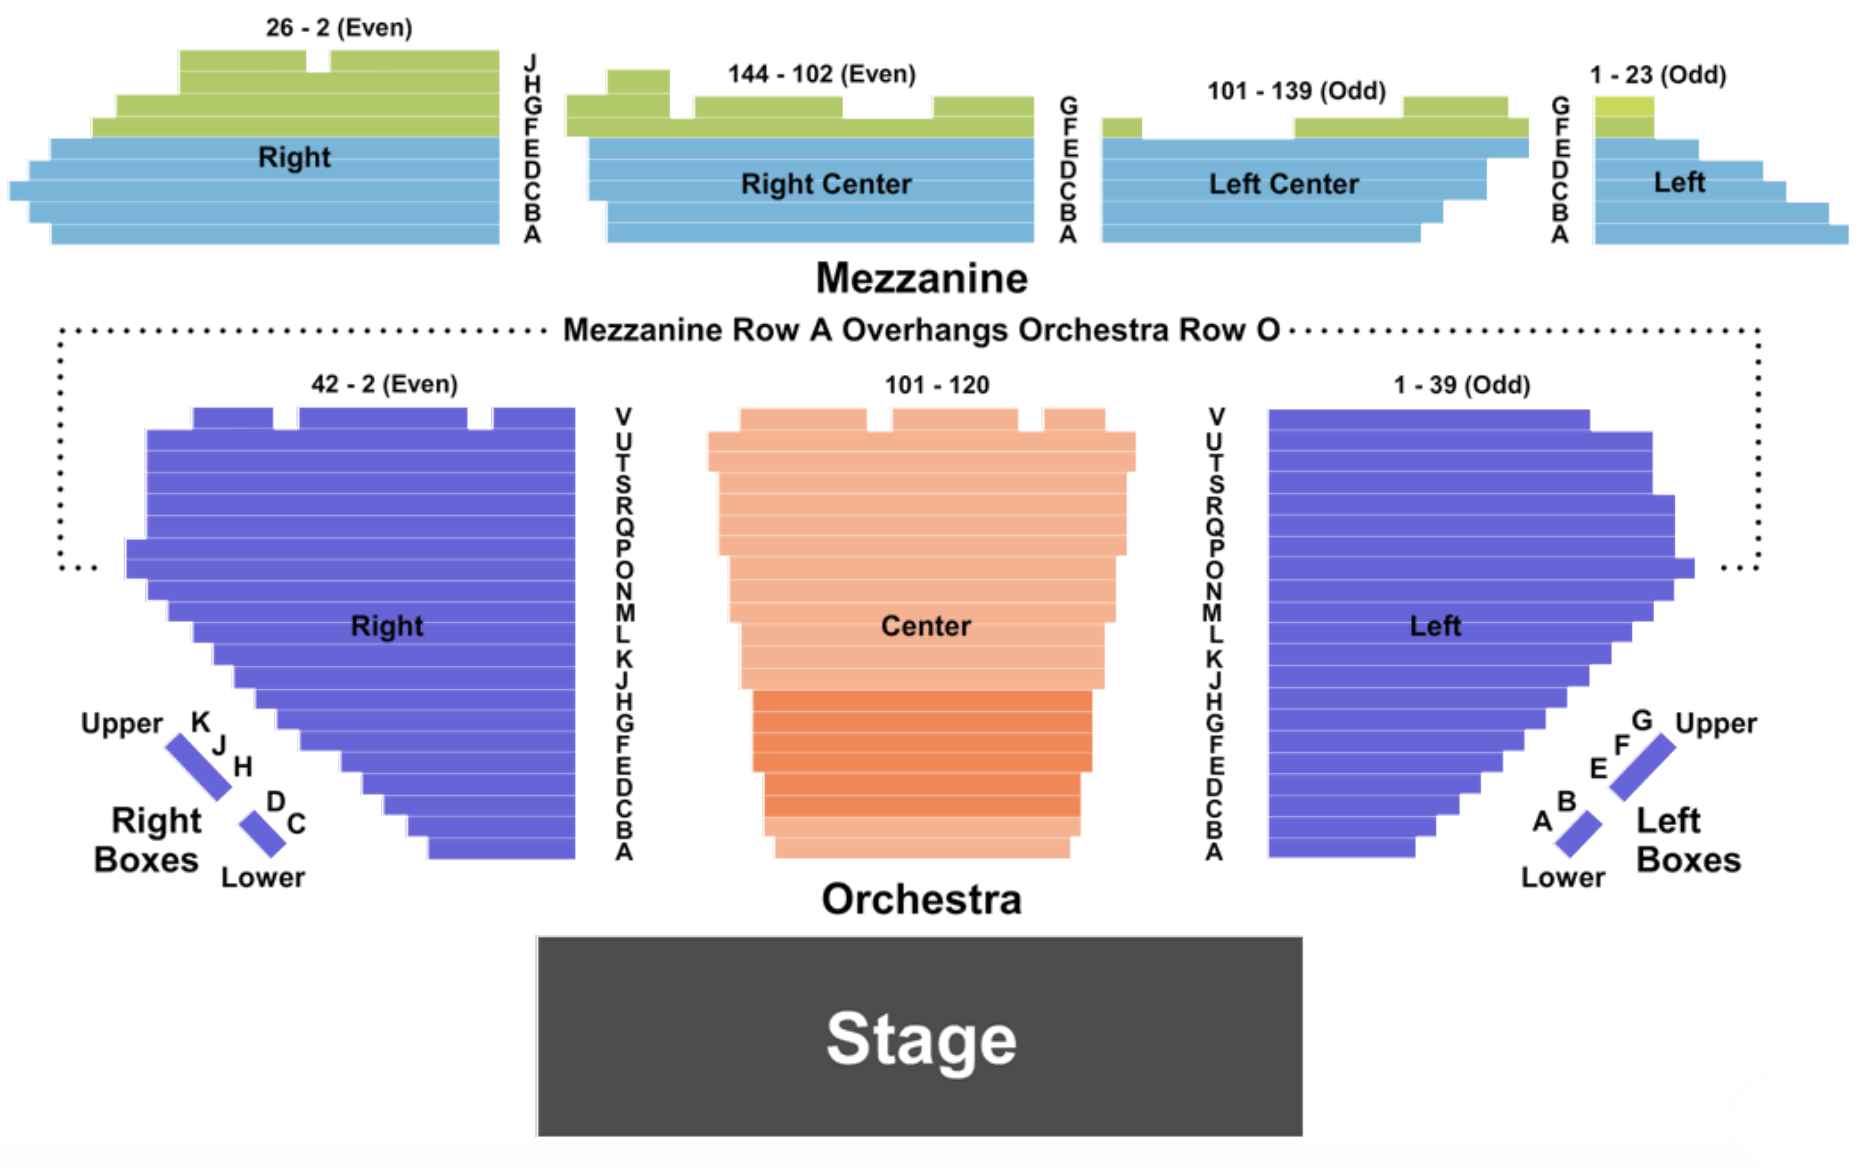 Square Garden Theater Seating Chart With Seat Numbers